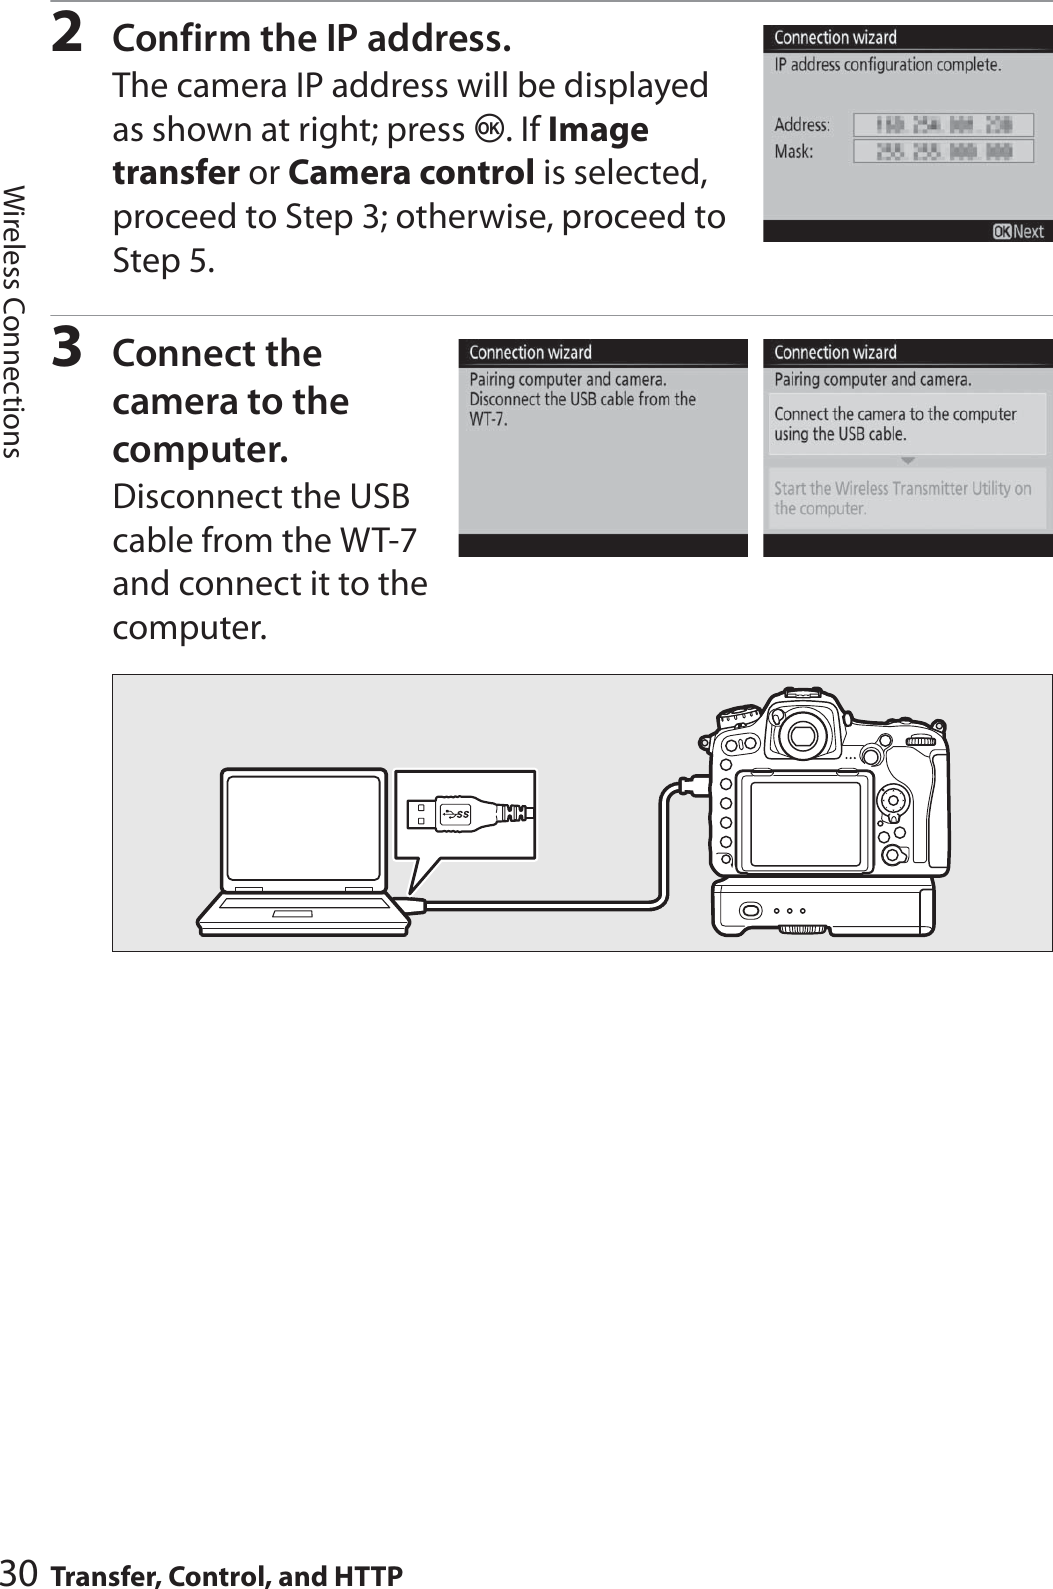 30 Transfer, Control, and HTTPWireless Connections2Confirm the IP address.The camera IP address will be displayed as shown at right; press J. If Image transfer or Camera control is selected, proceed to Step 3; otherwise, proceed to Step 5.3Connect the camera to the computer.Disconnect the USB cable from the WT-7 and connect it to the computer.